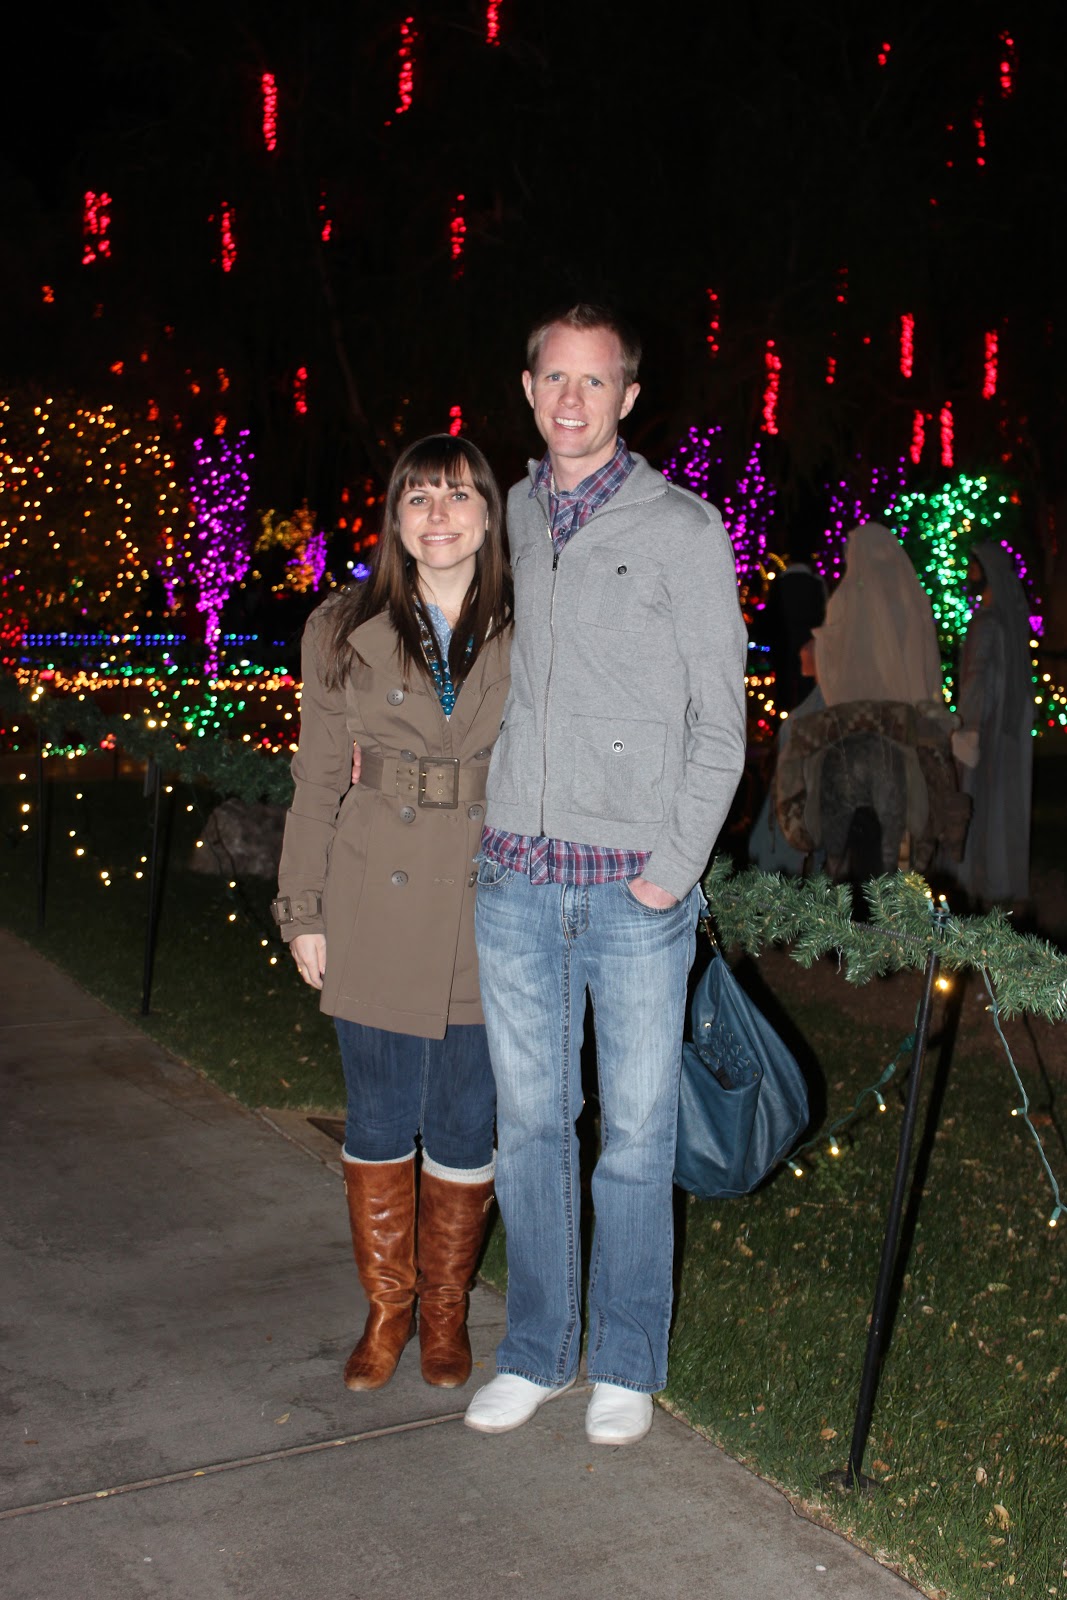 12 Months of Dates December: Temple Lights and Hot Chocolate